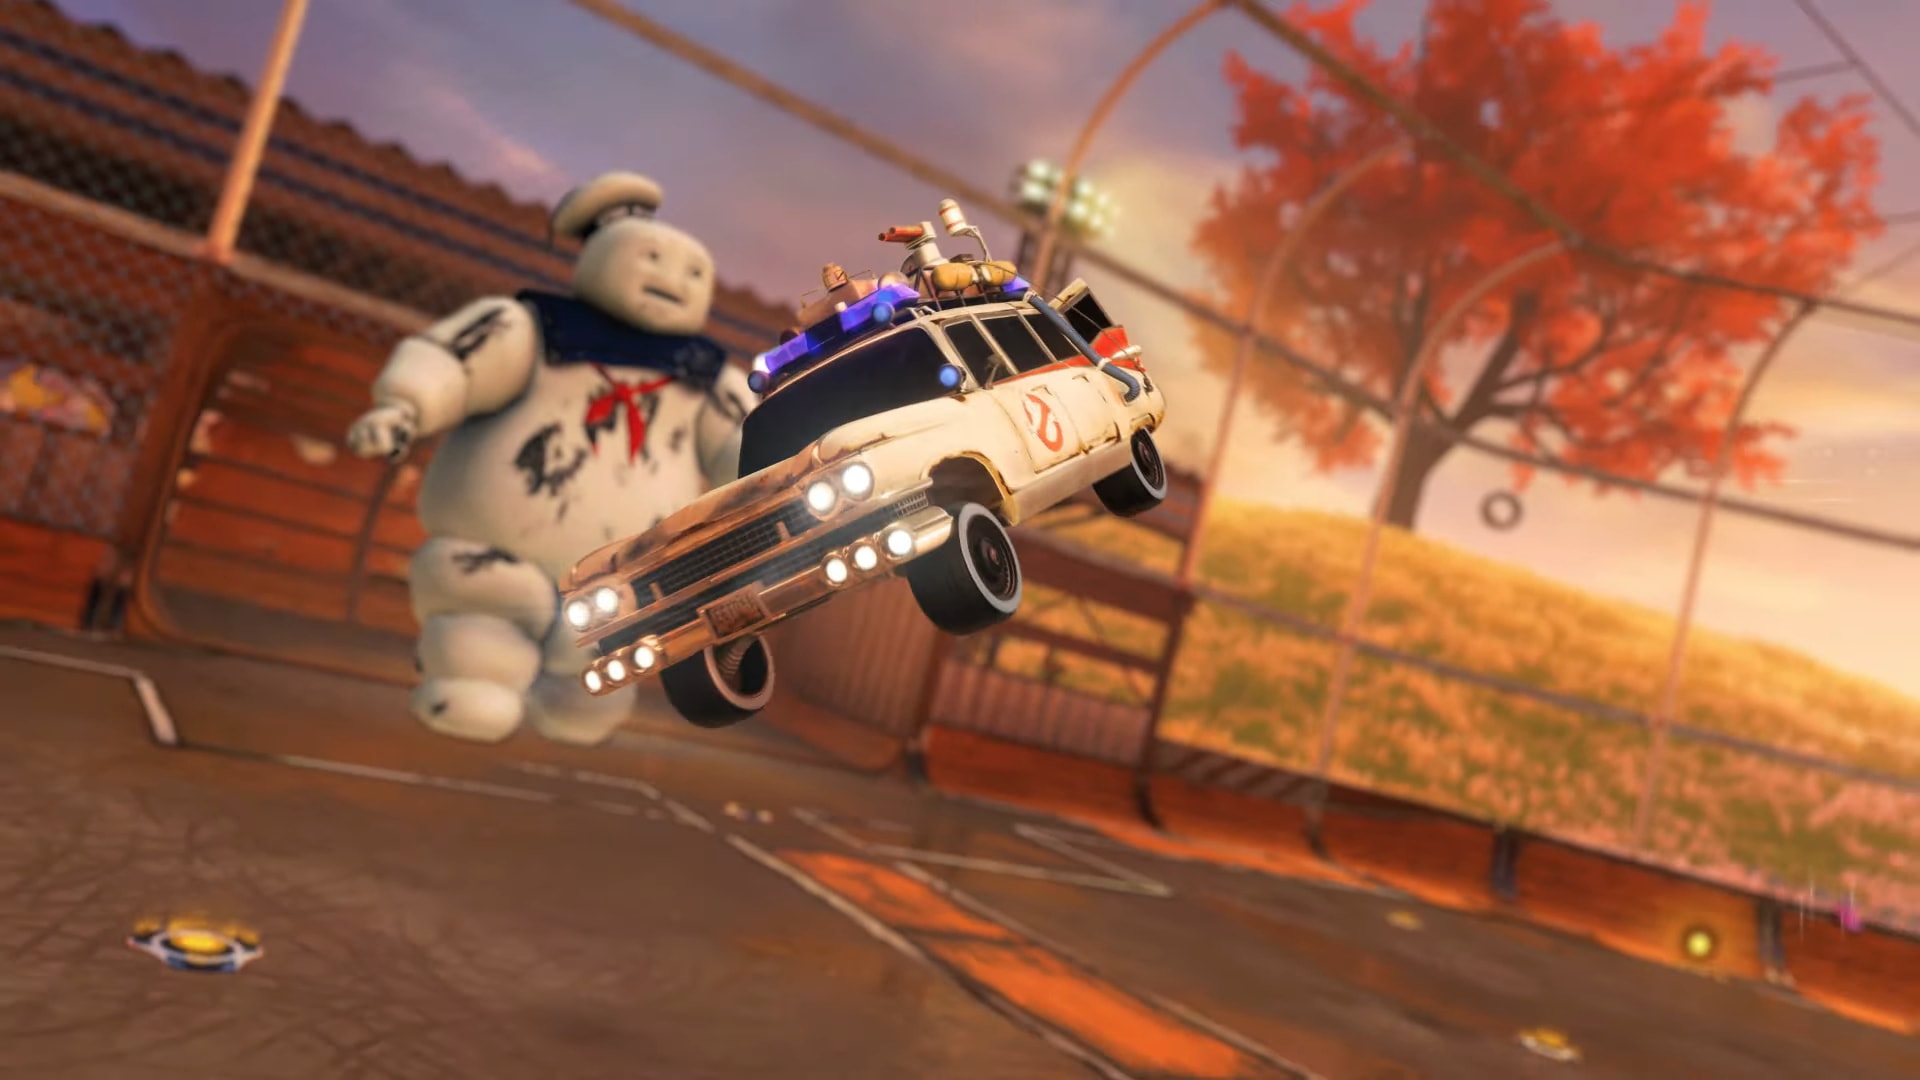 Ghostbusters’ Ecto1 Car Returns to Rocket League for a Limited Time